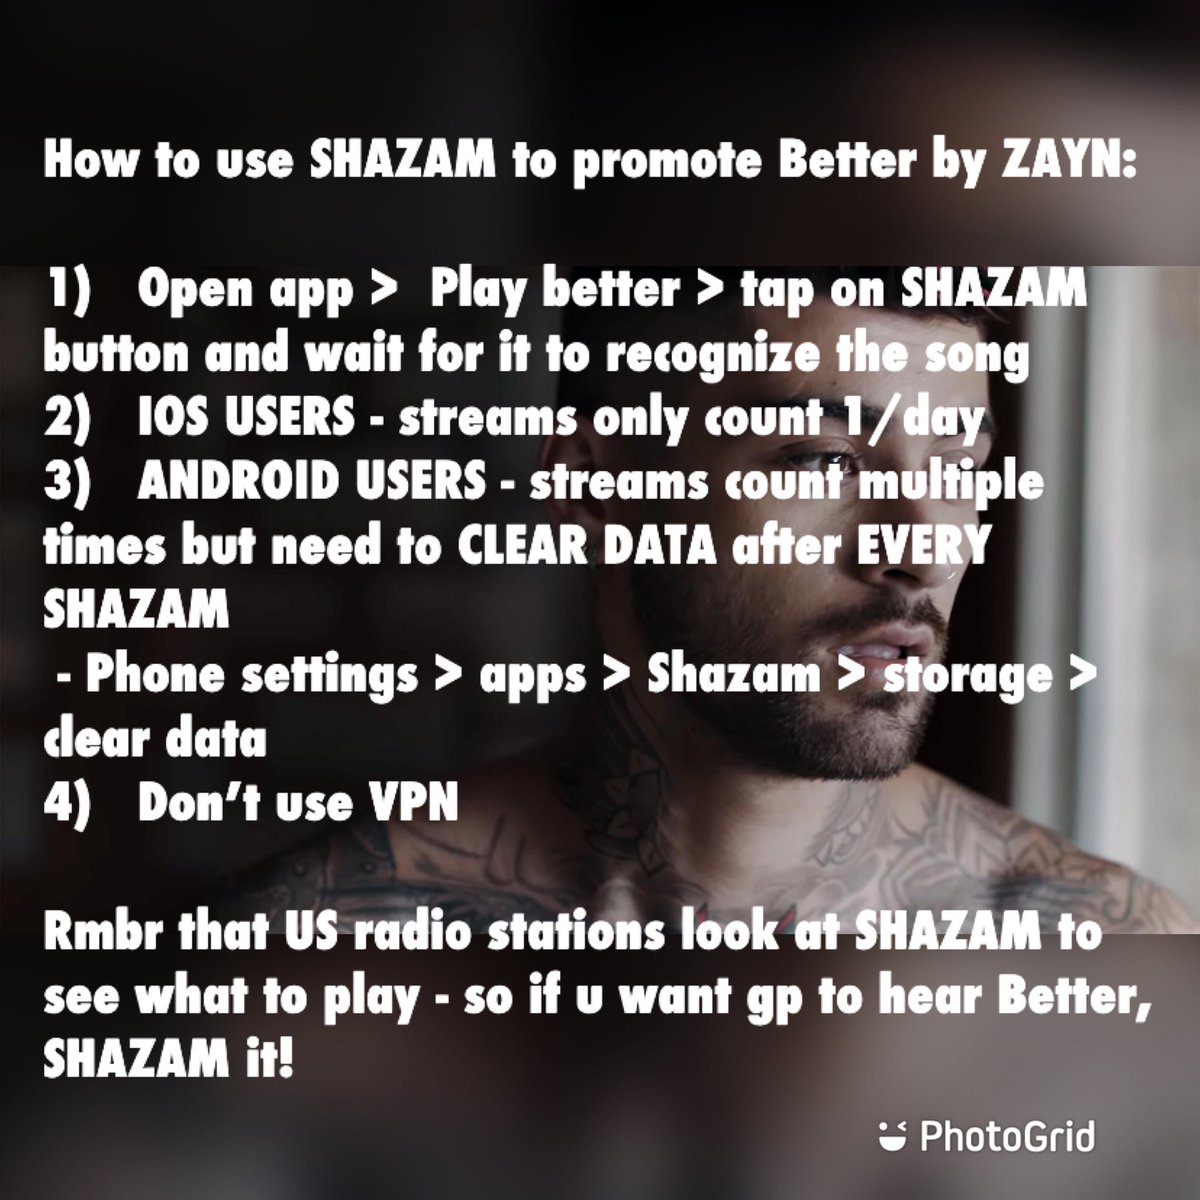 SHAZAM guidelines for BETTER by ZAYN